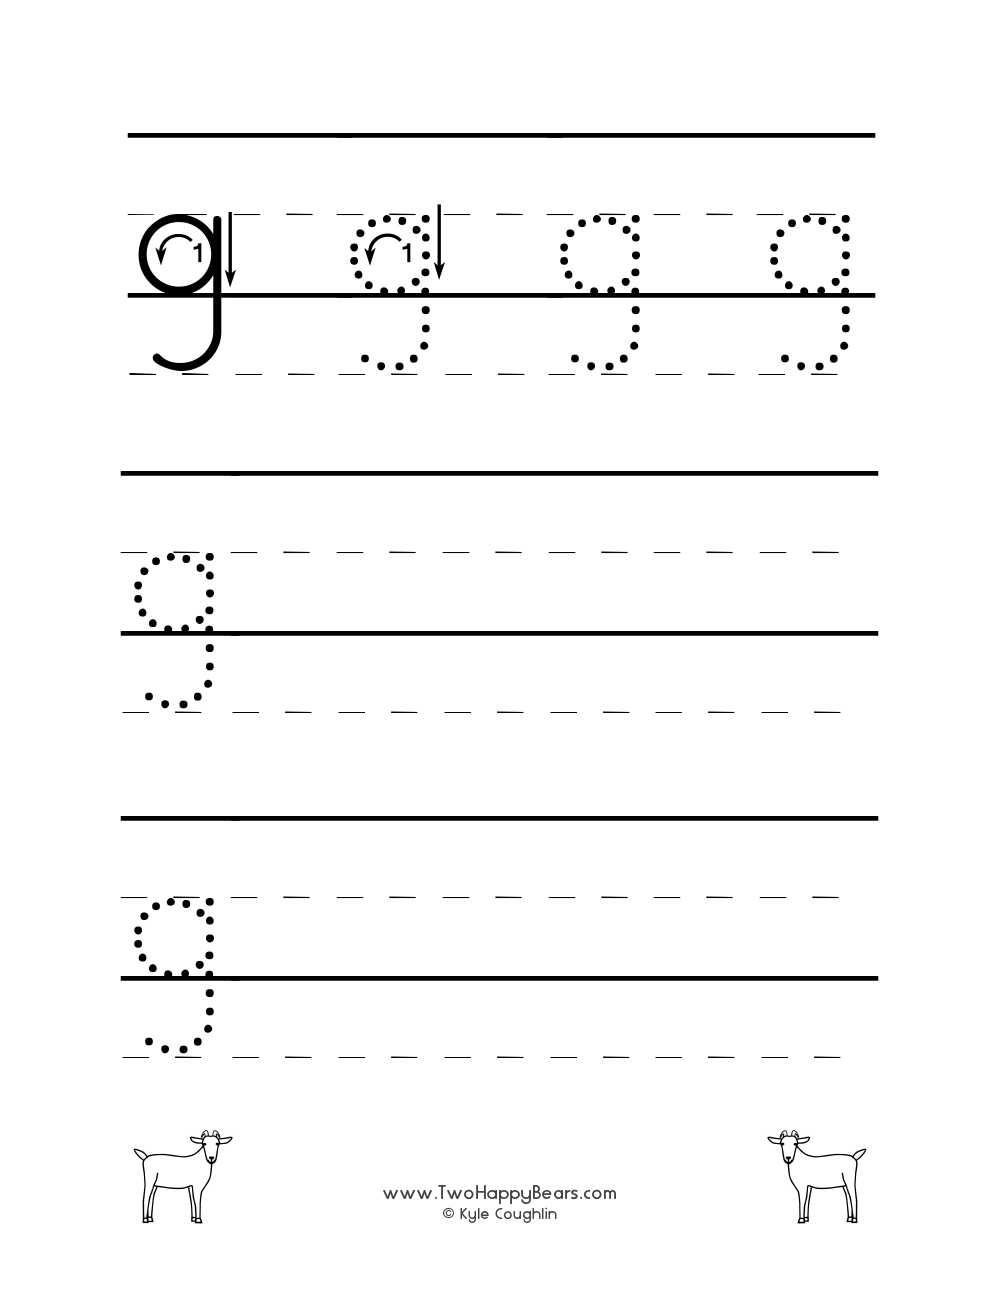 Worksheet for tracing and writing the lowercase letter G, in free printable PDF format.